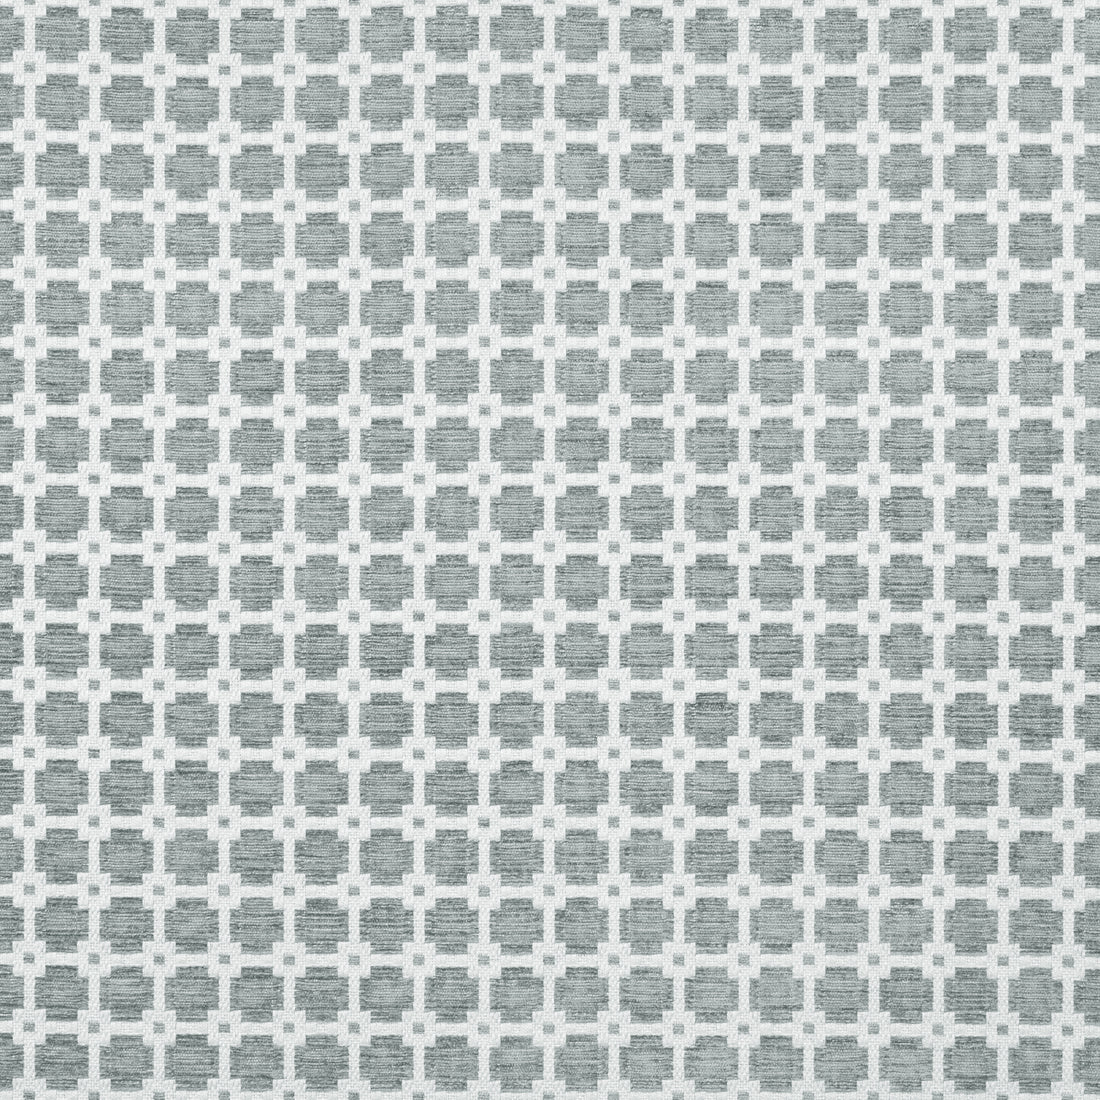 Apollo fabric in sterling grey color - pattern number W80721 - by Thibaut in the Woven Resource 11: Rialto collection